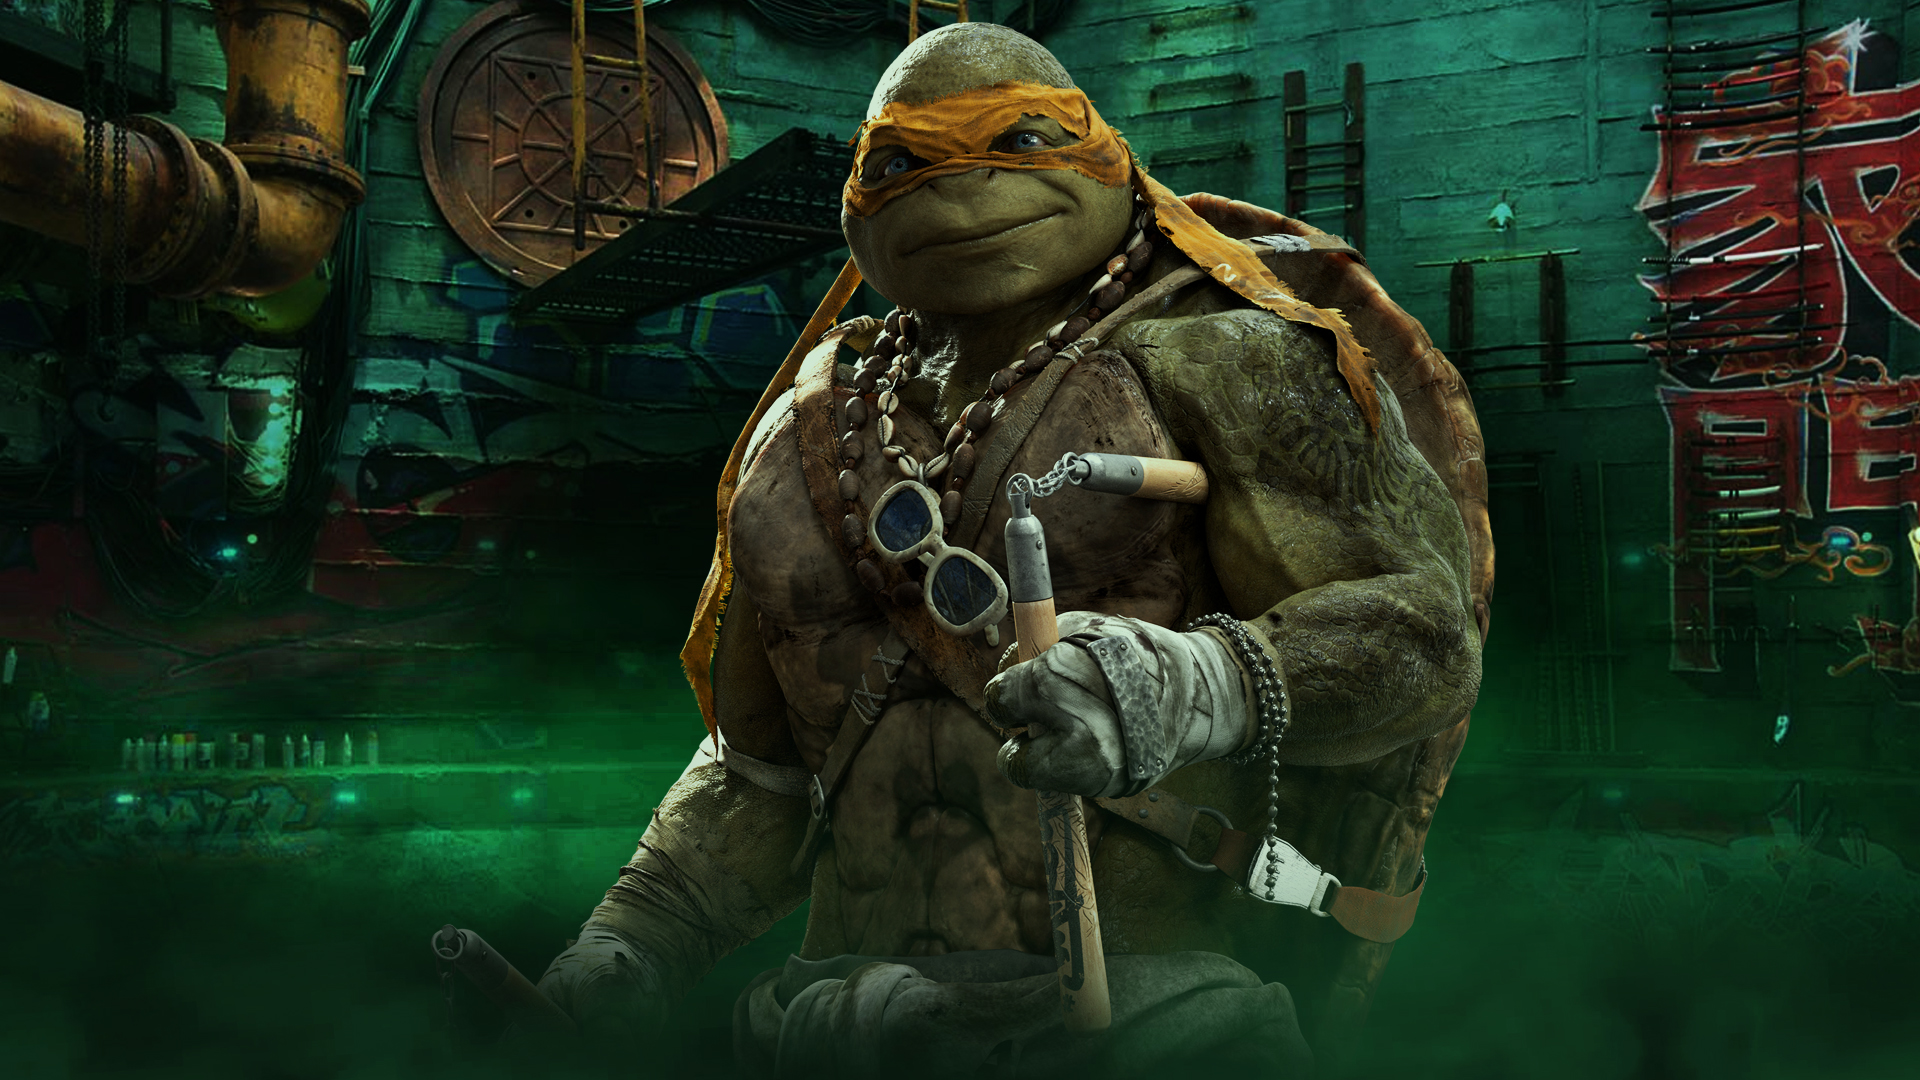 Tmnt Michelangelo Wallpaper By Sachso74 On